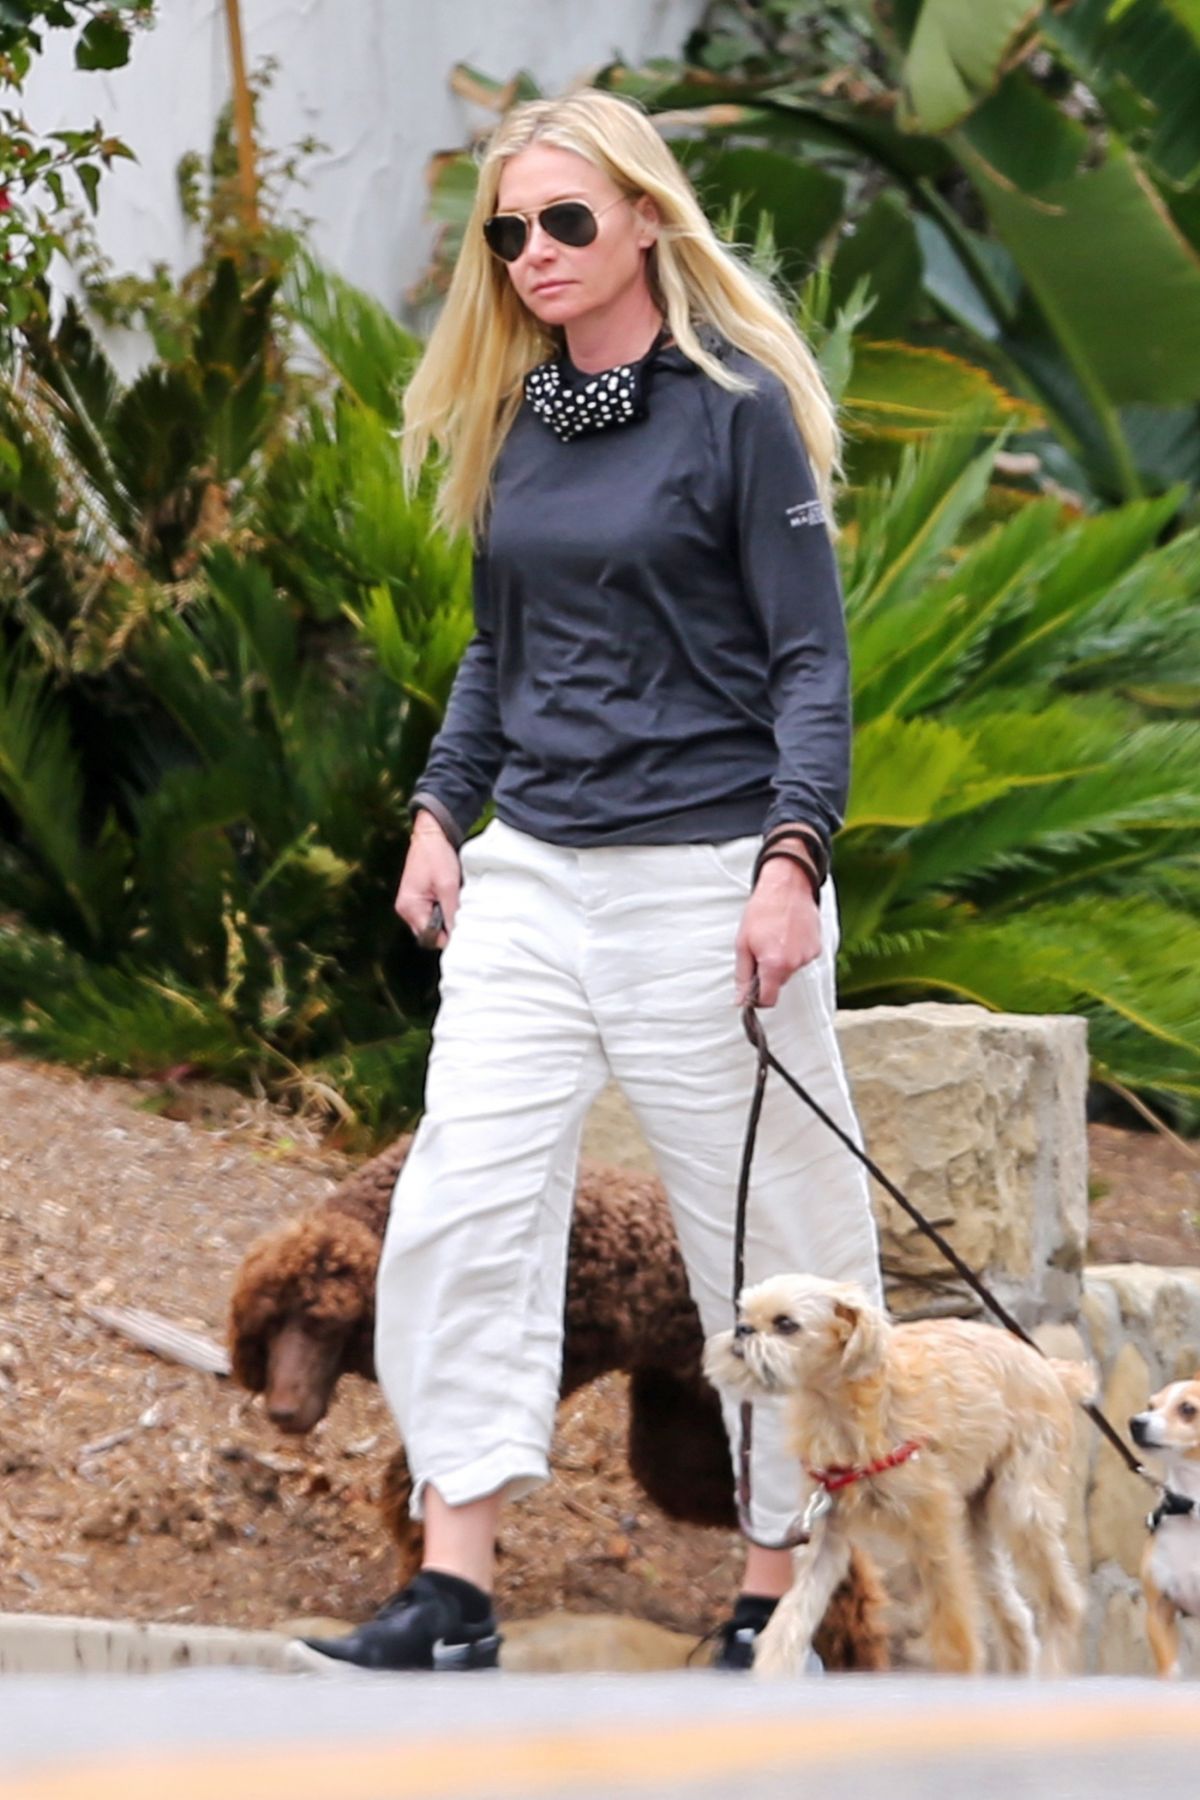 portia-de-rossi-out-with-her-dog-in-montecito-03-22-2021-6.jpg